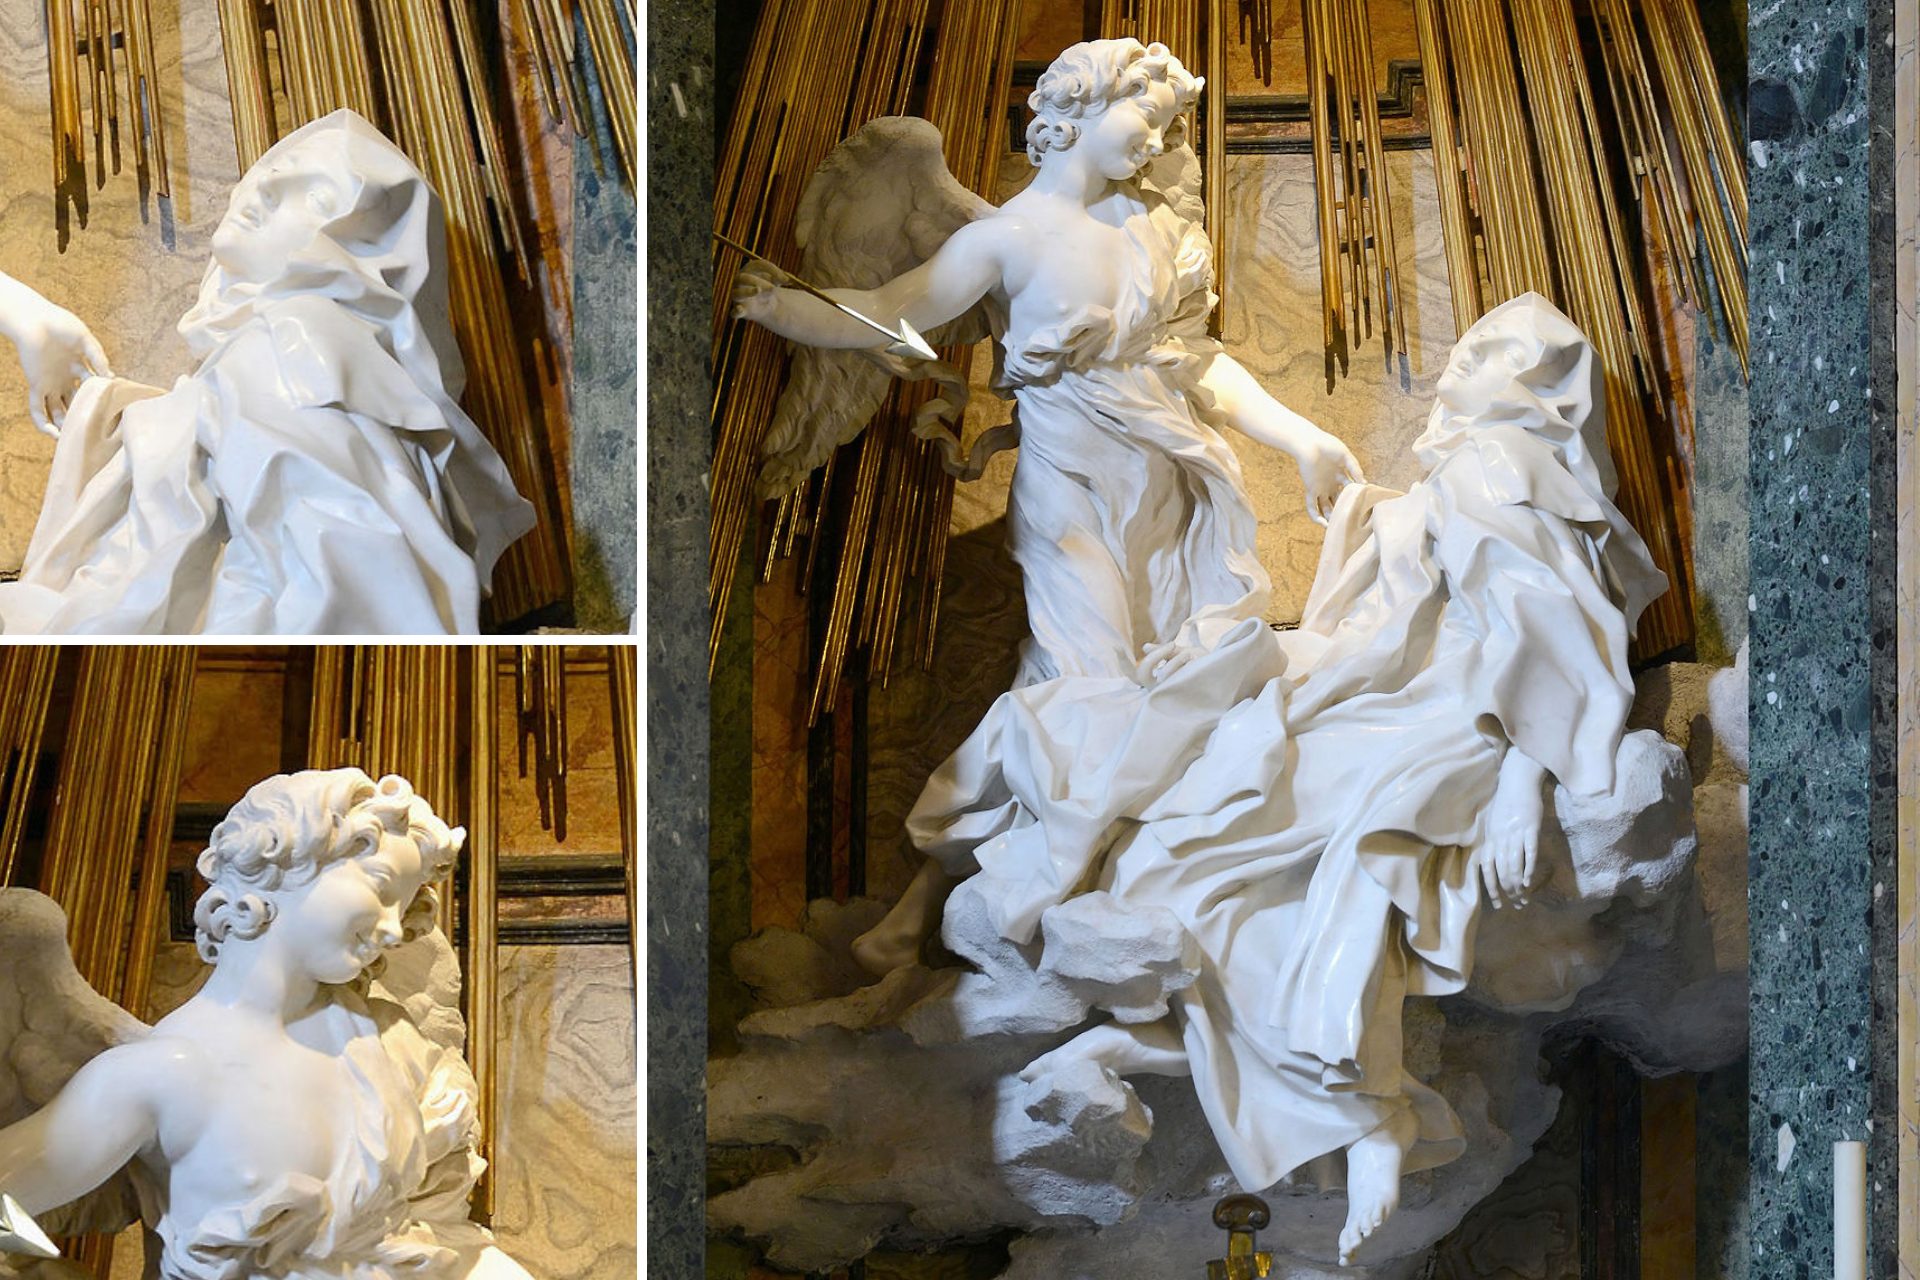 A photograph of the sculpture that depicts Teresa of Ávila, a Spanish Carmelite nun and saint, swooning in a state of religious ecstasy, while an angel holding a spear stands over her.